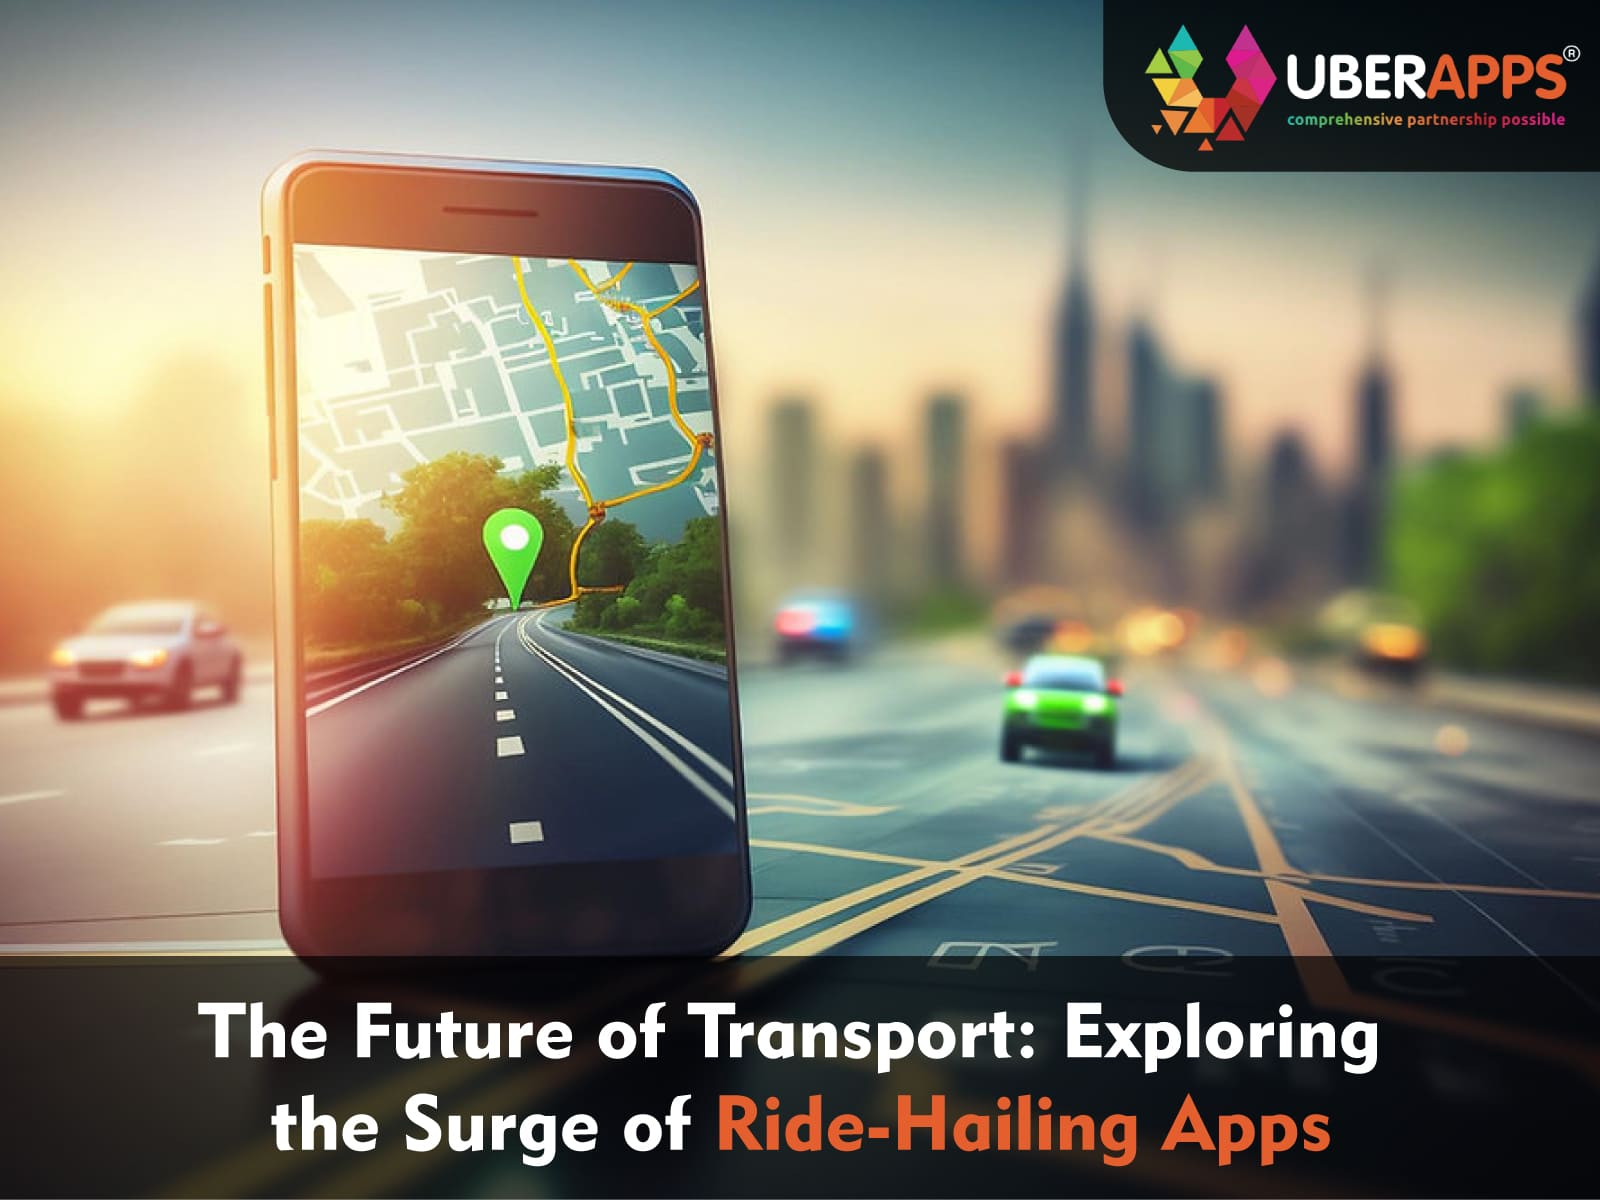 The Future of Transport: Exploring the Surge of Ride-Hailing Apps